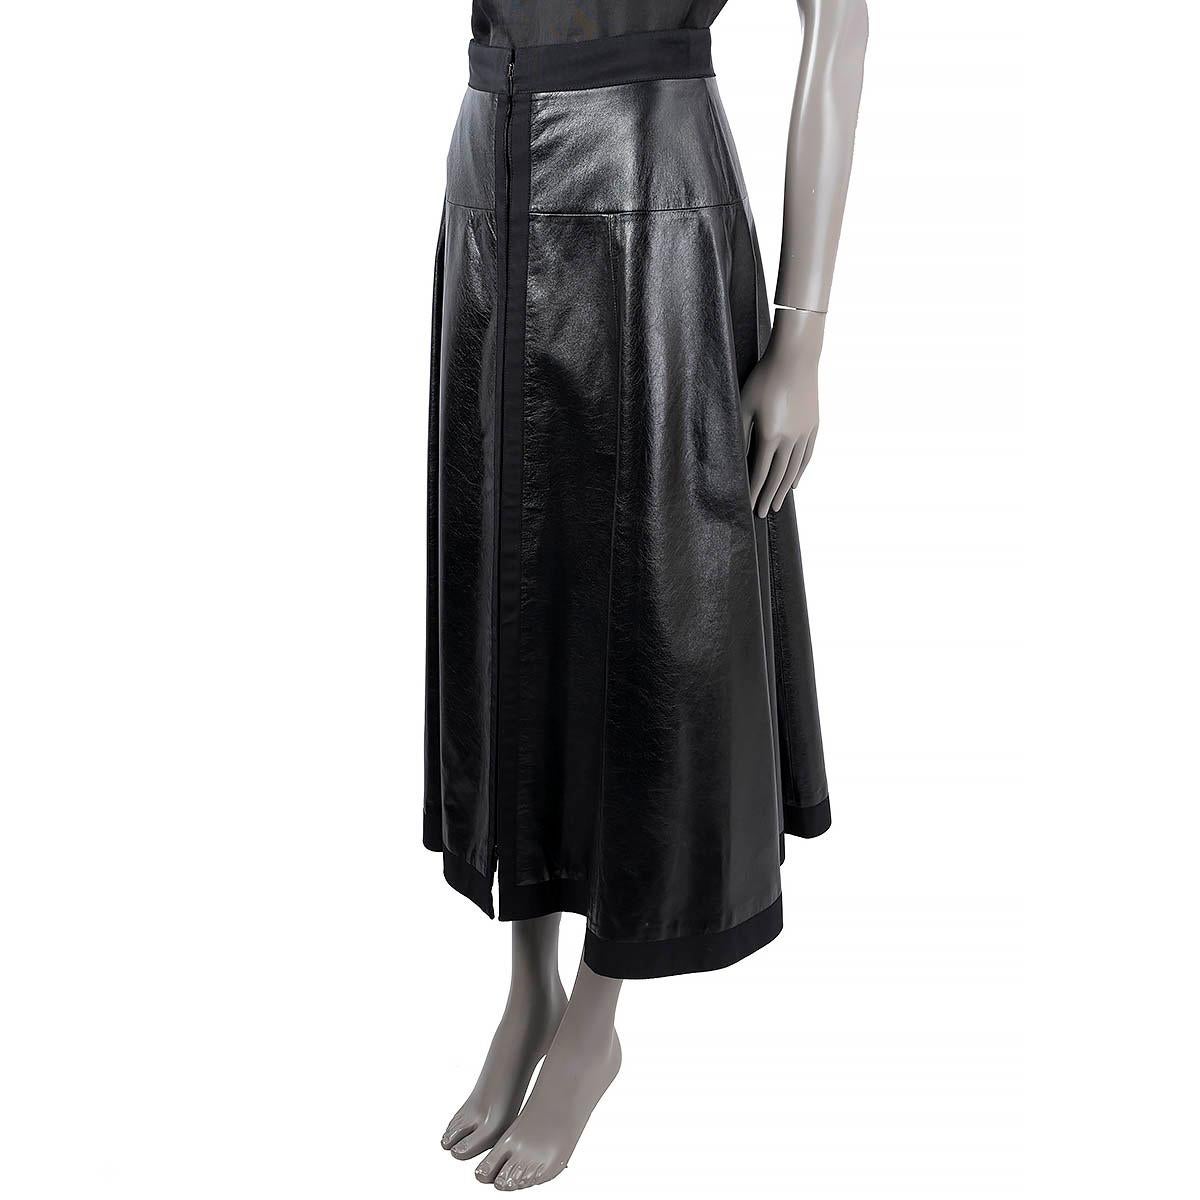 100% authentic Chanel 2016 leather midi skirt in black lambskin (100%). Features a zip front and two slant pockets on the front. Lined in cotton (75%) and silk (25%). Has been worn and is in excellent condition.

Chanel 2016